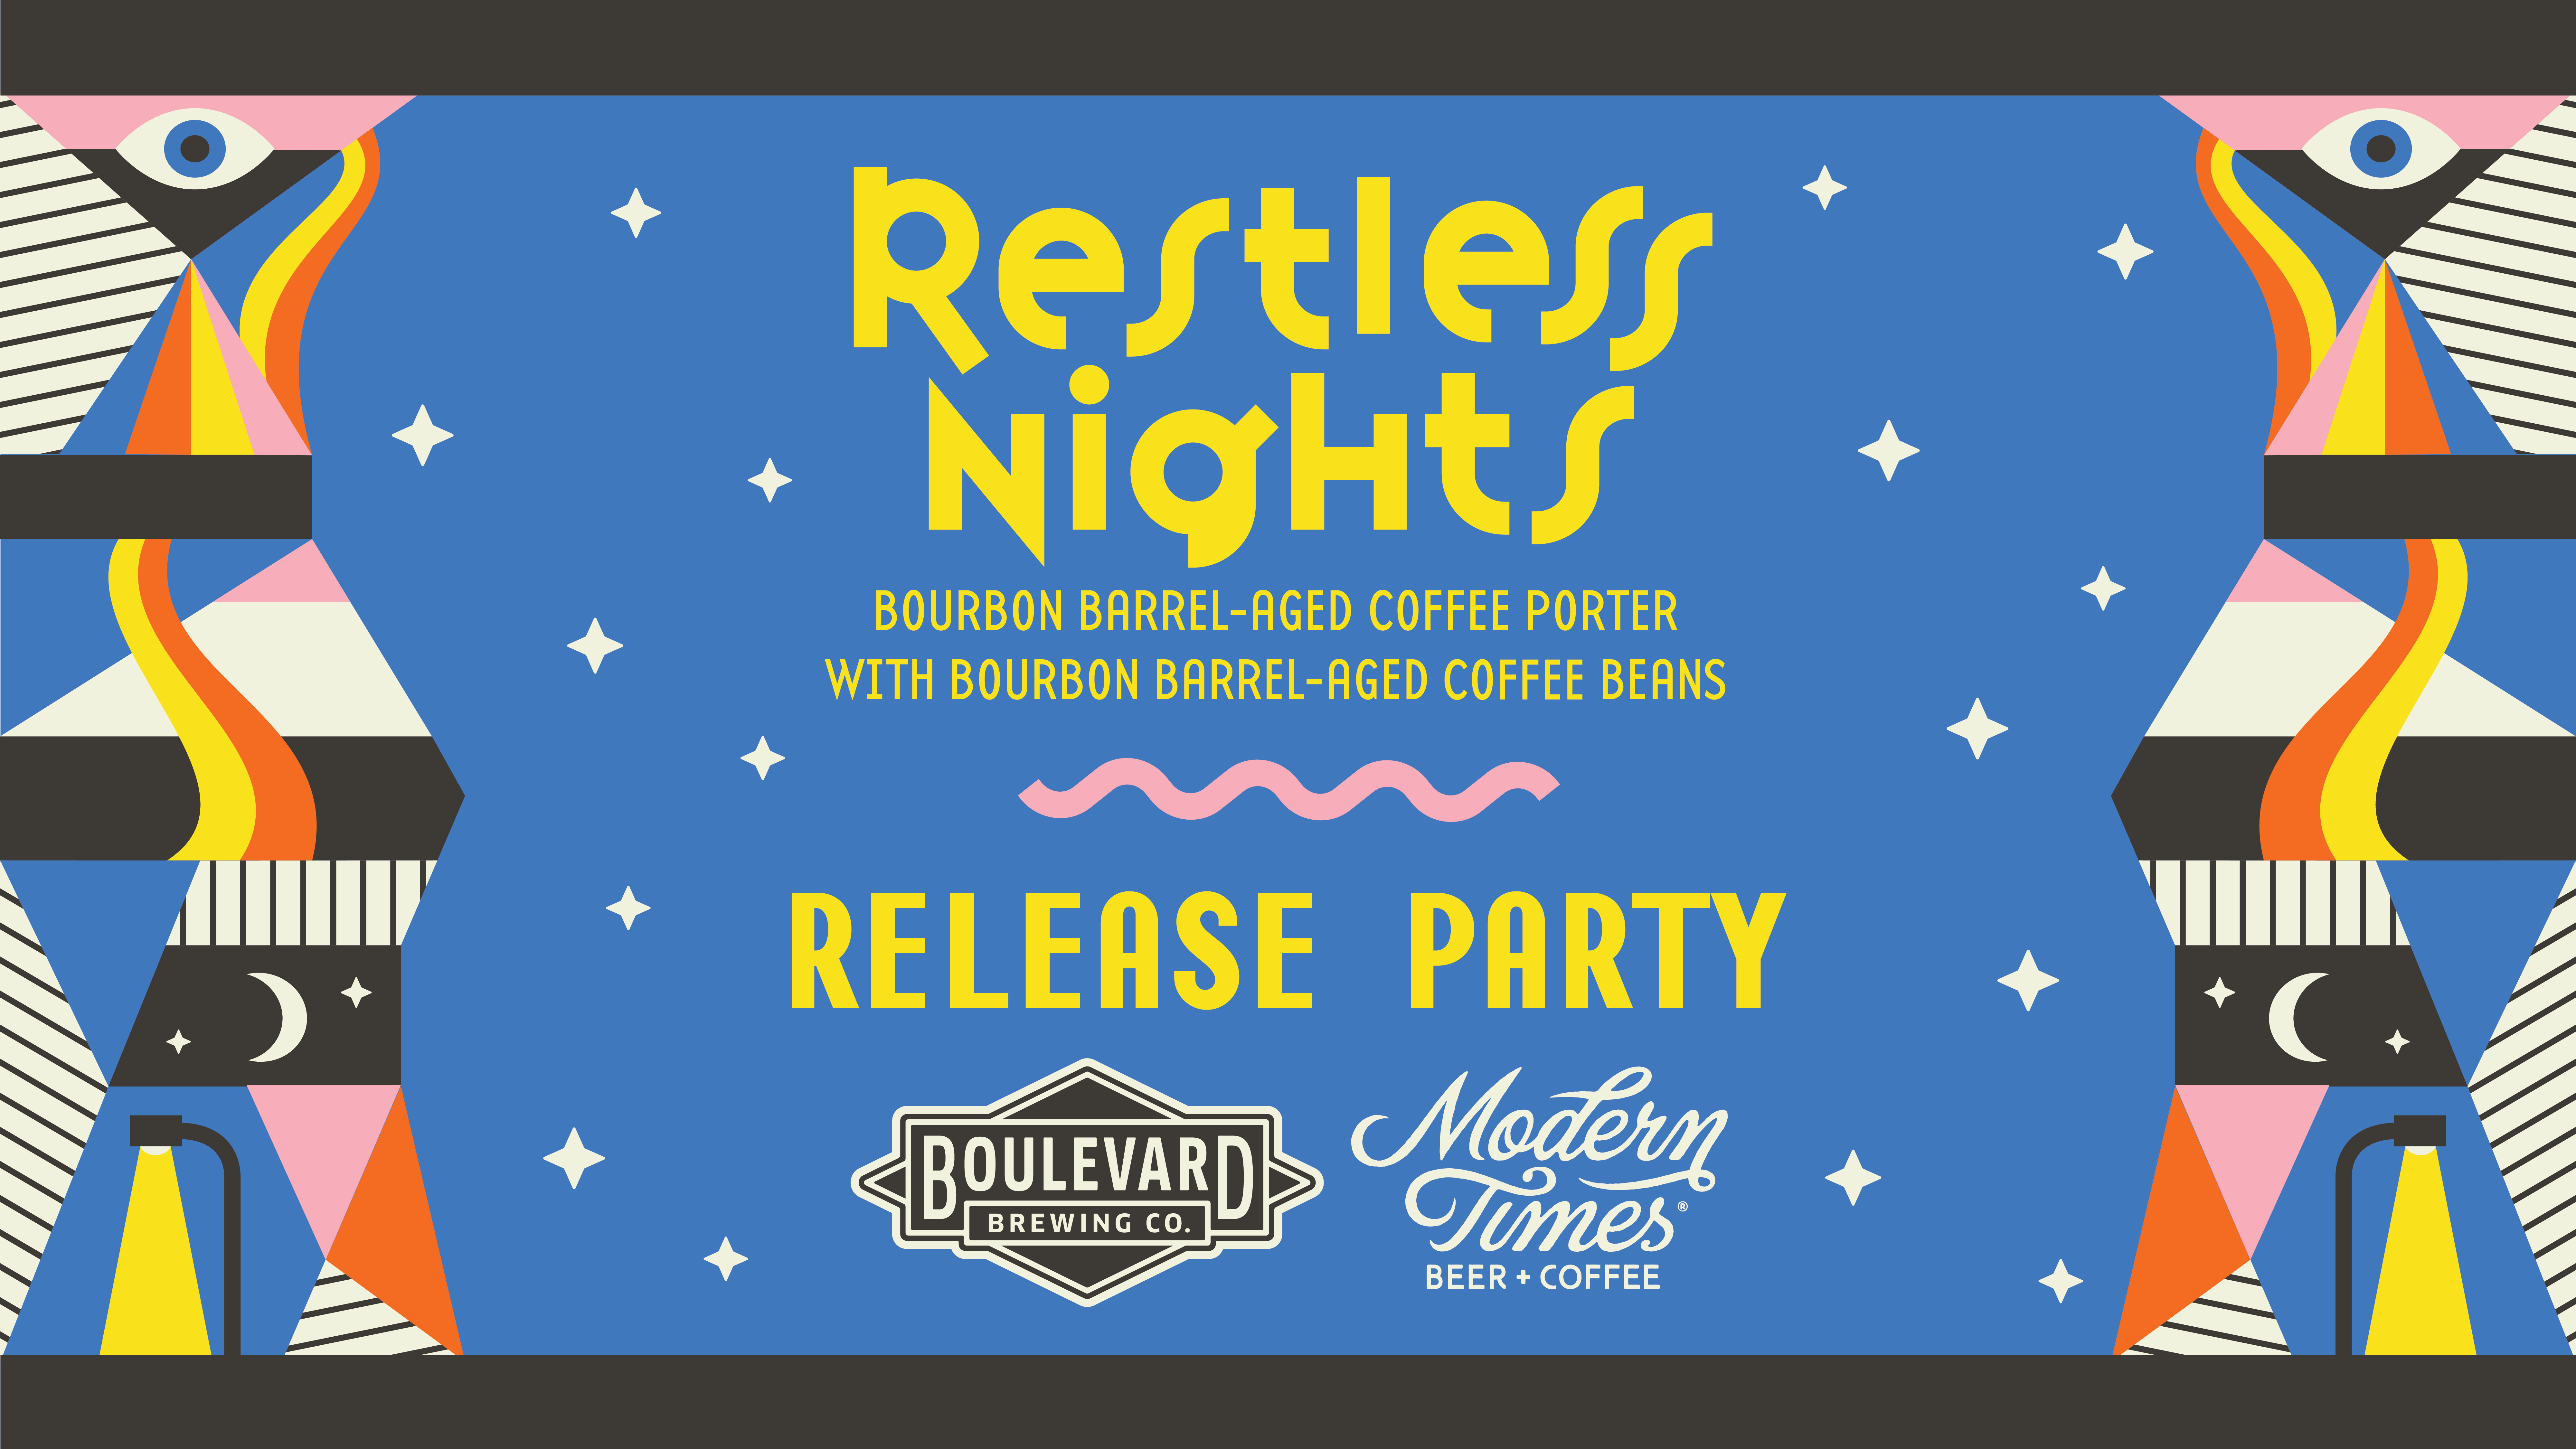 Restless Nights Release Party